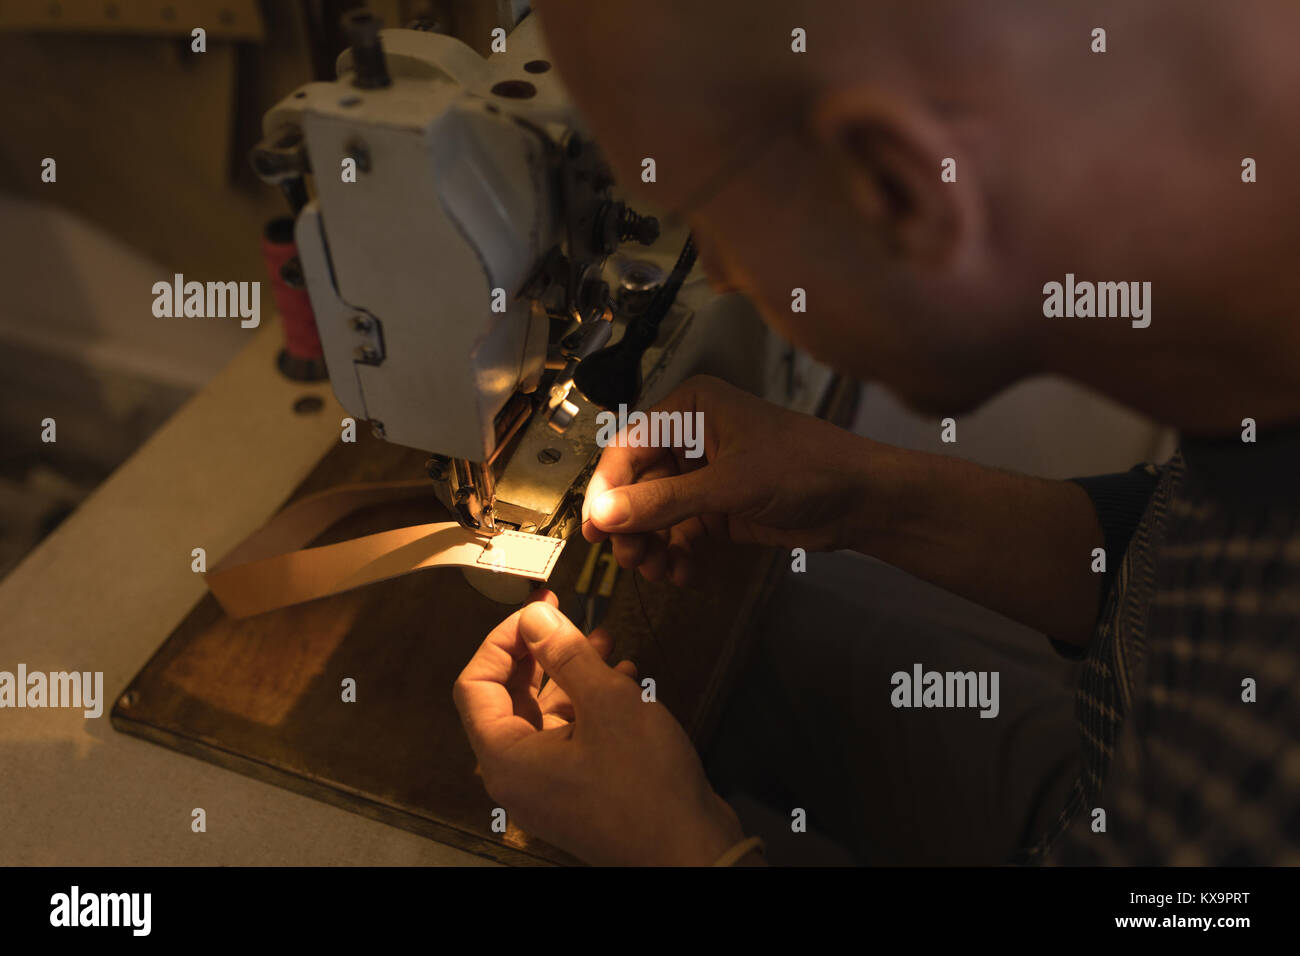 Worker sewing leather scrap in workshop Stock Photo